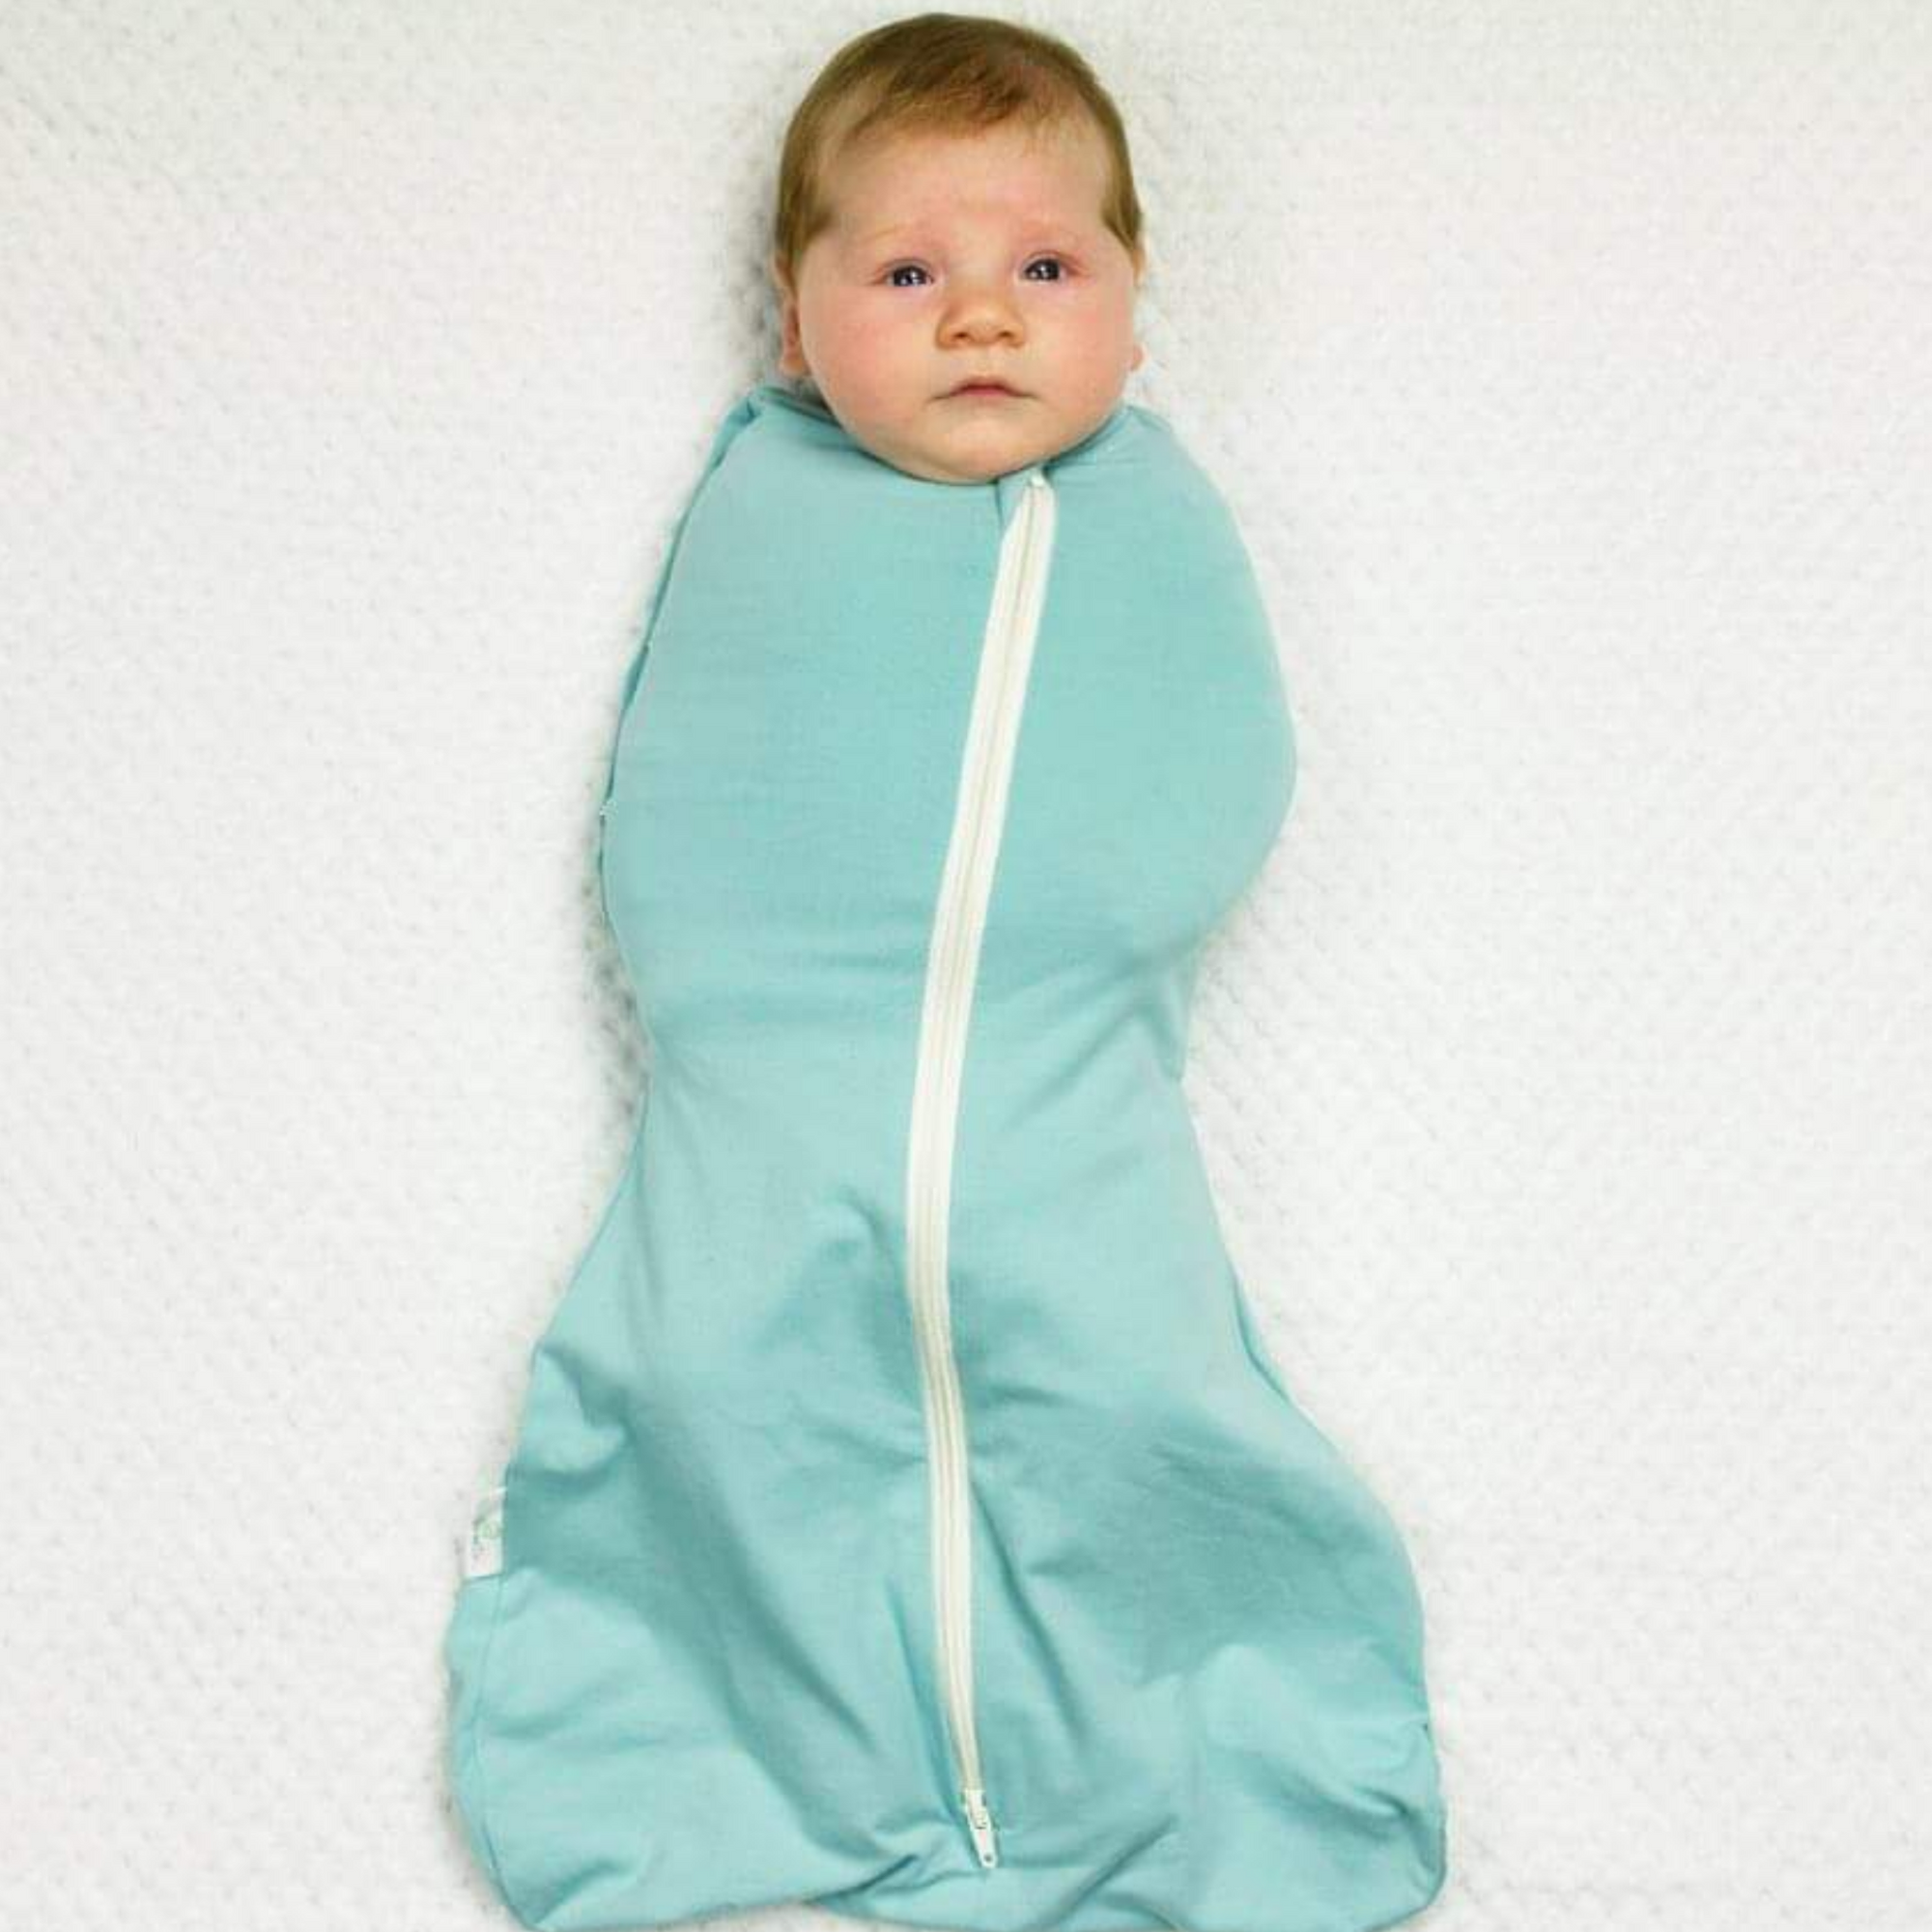 Why babies love being swaddled